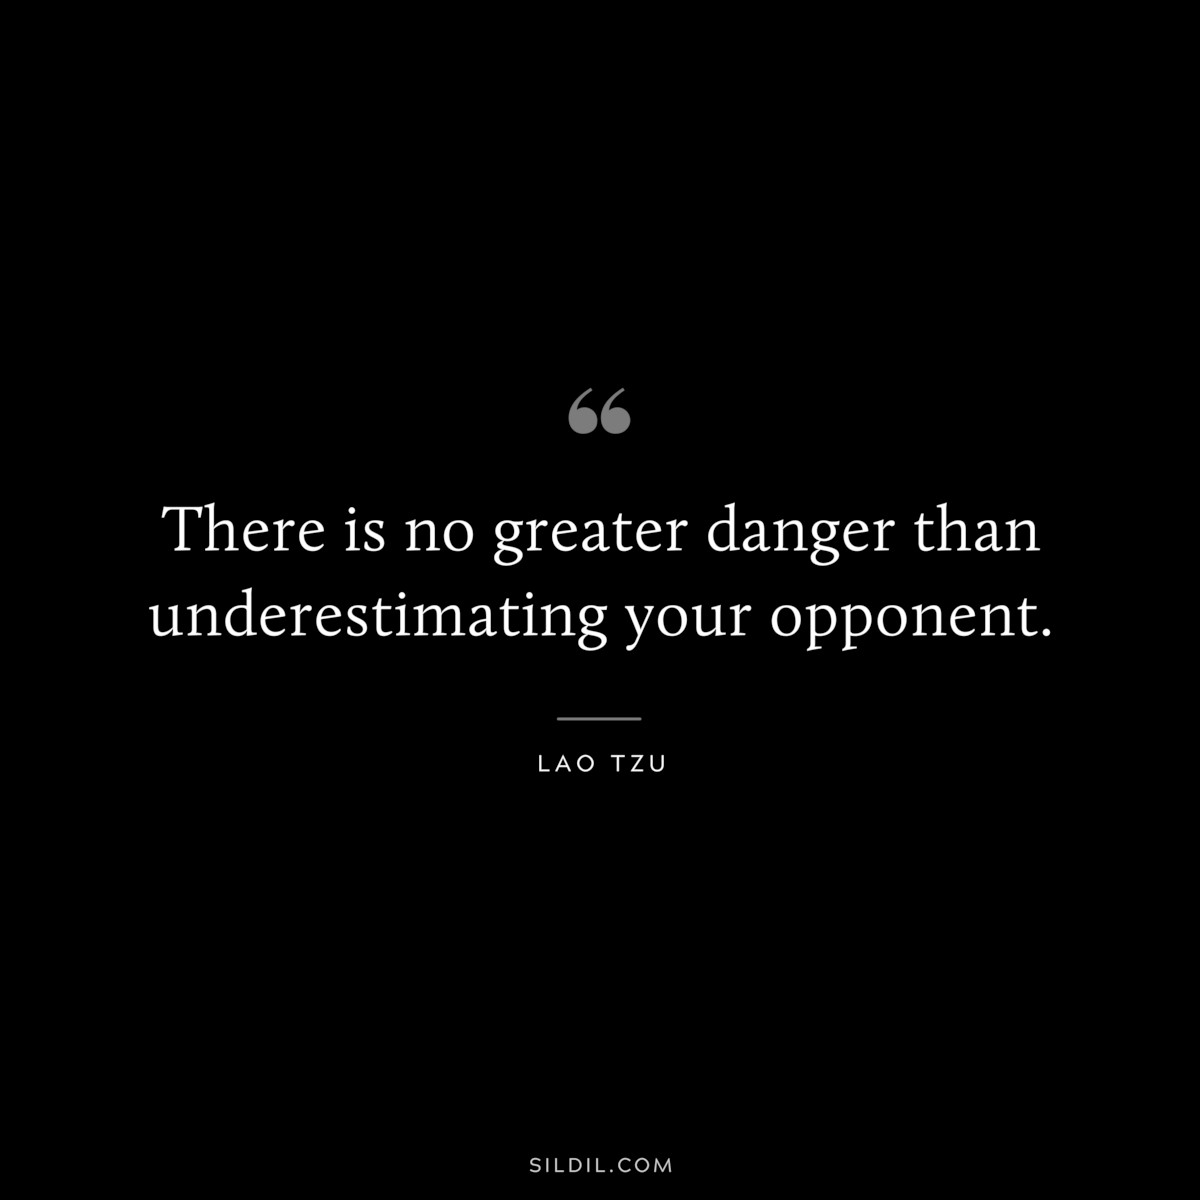 There is no greater danger than underestimating your opponent. ― Lao Tzu